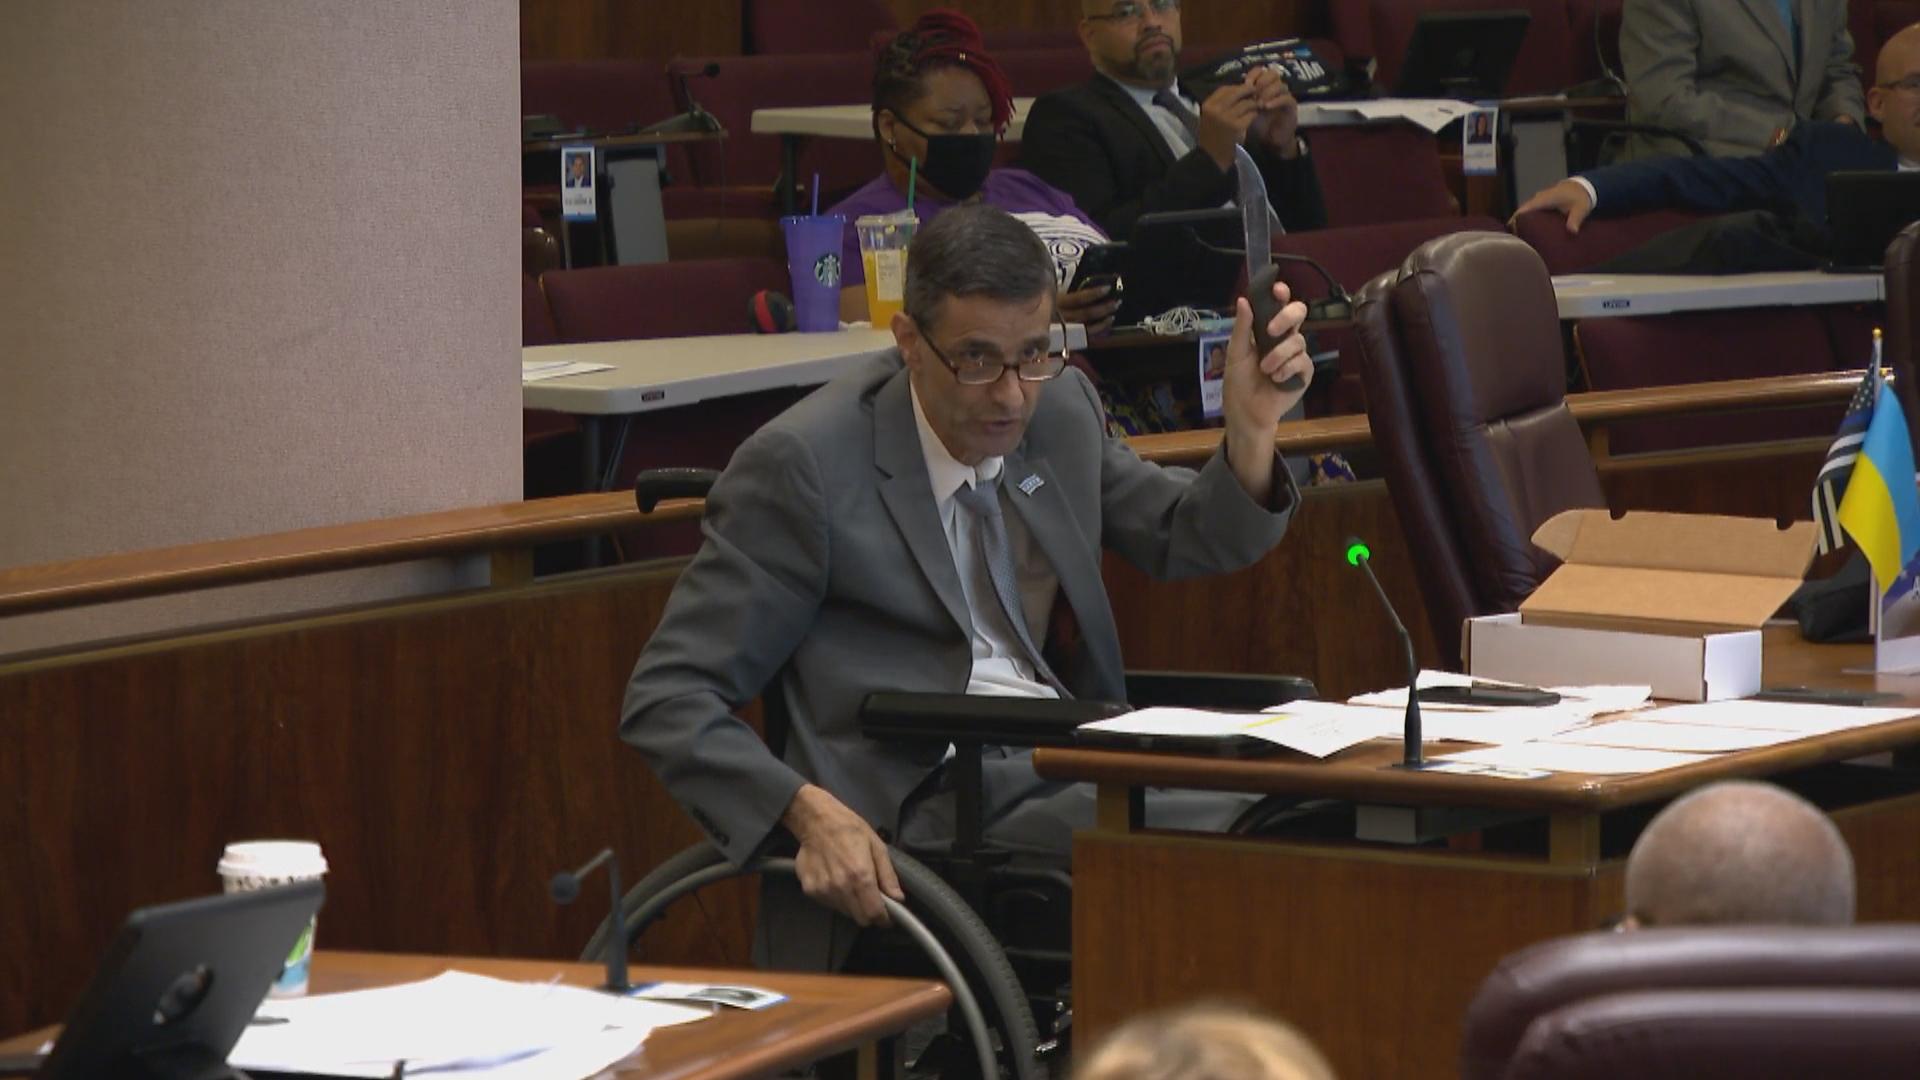 Ald. Nicholas Sposato (38th Ward) holds up a knife during a City Council meeting on Sept. 21, 2022, to explain his vote against a police misconduct settlement. (WTTW News)